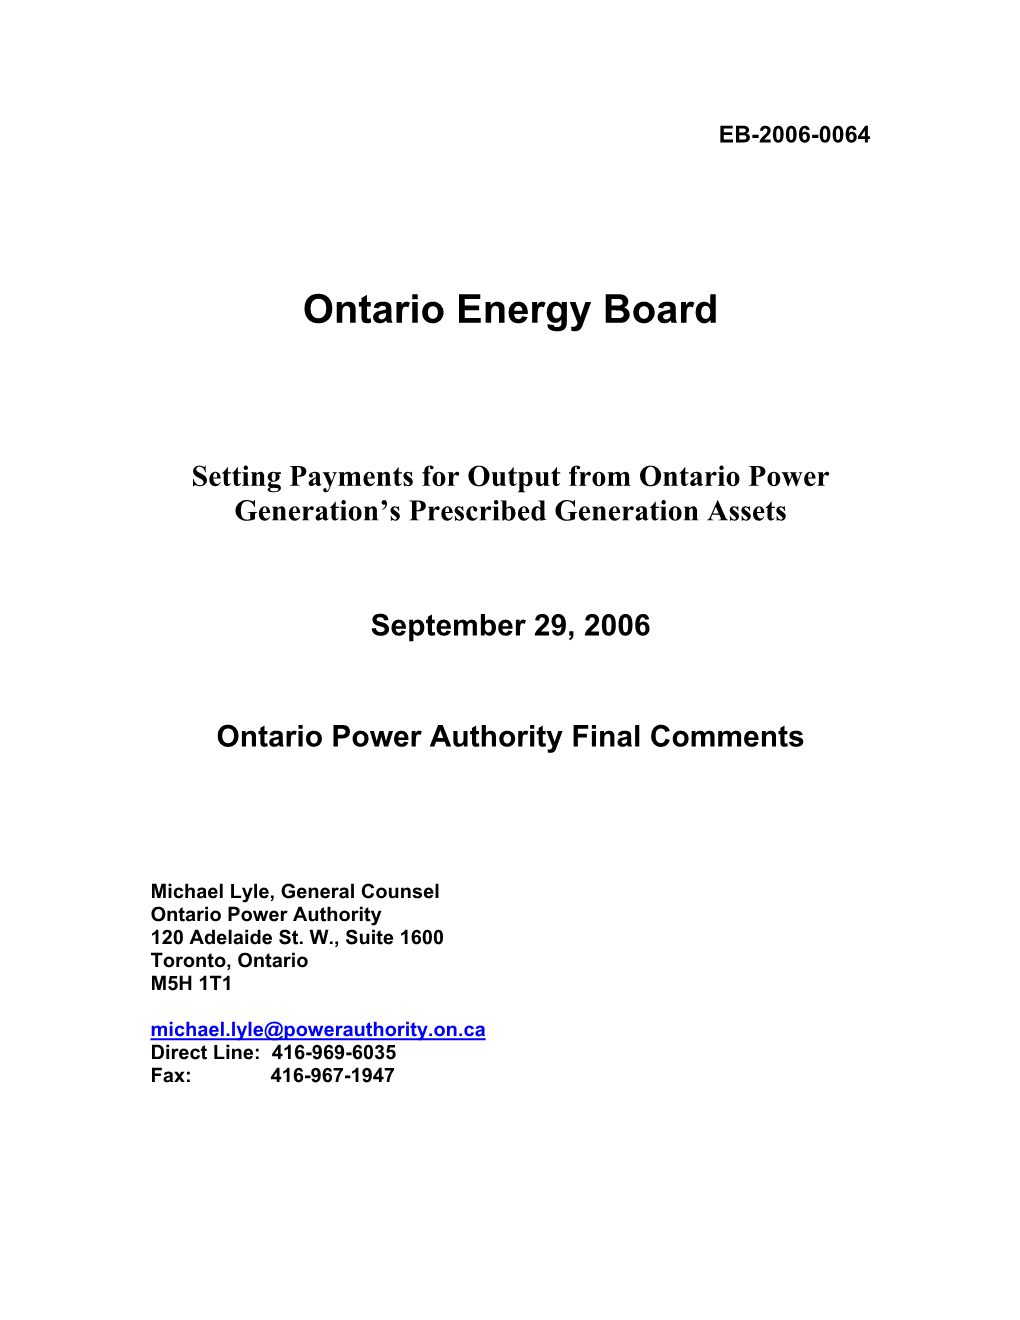 Ontario Power Authority Final Comments